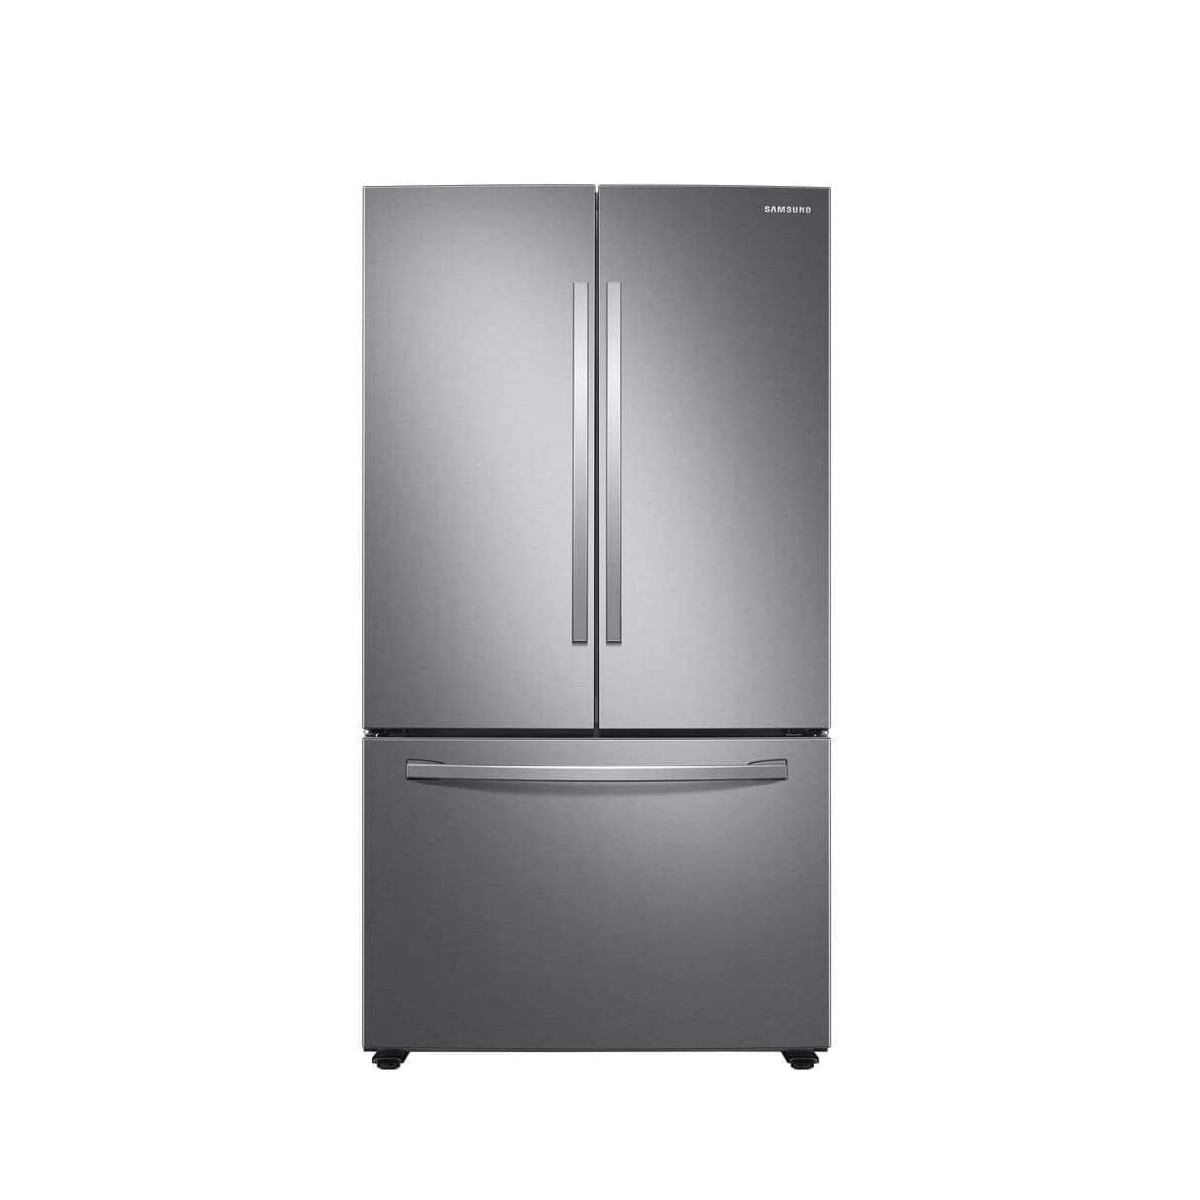 How to turn off Samsung refrigerator without unplugging